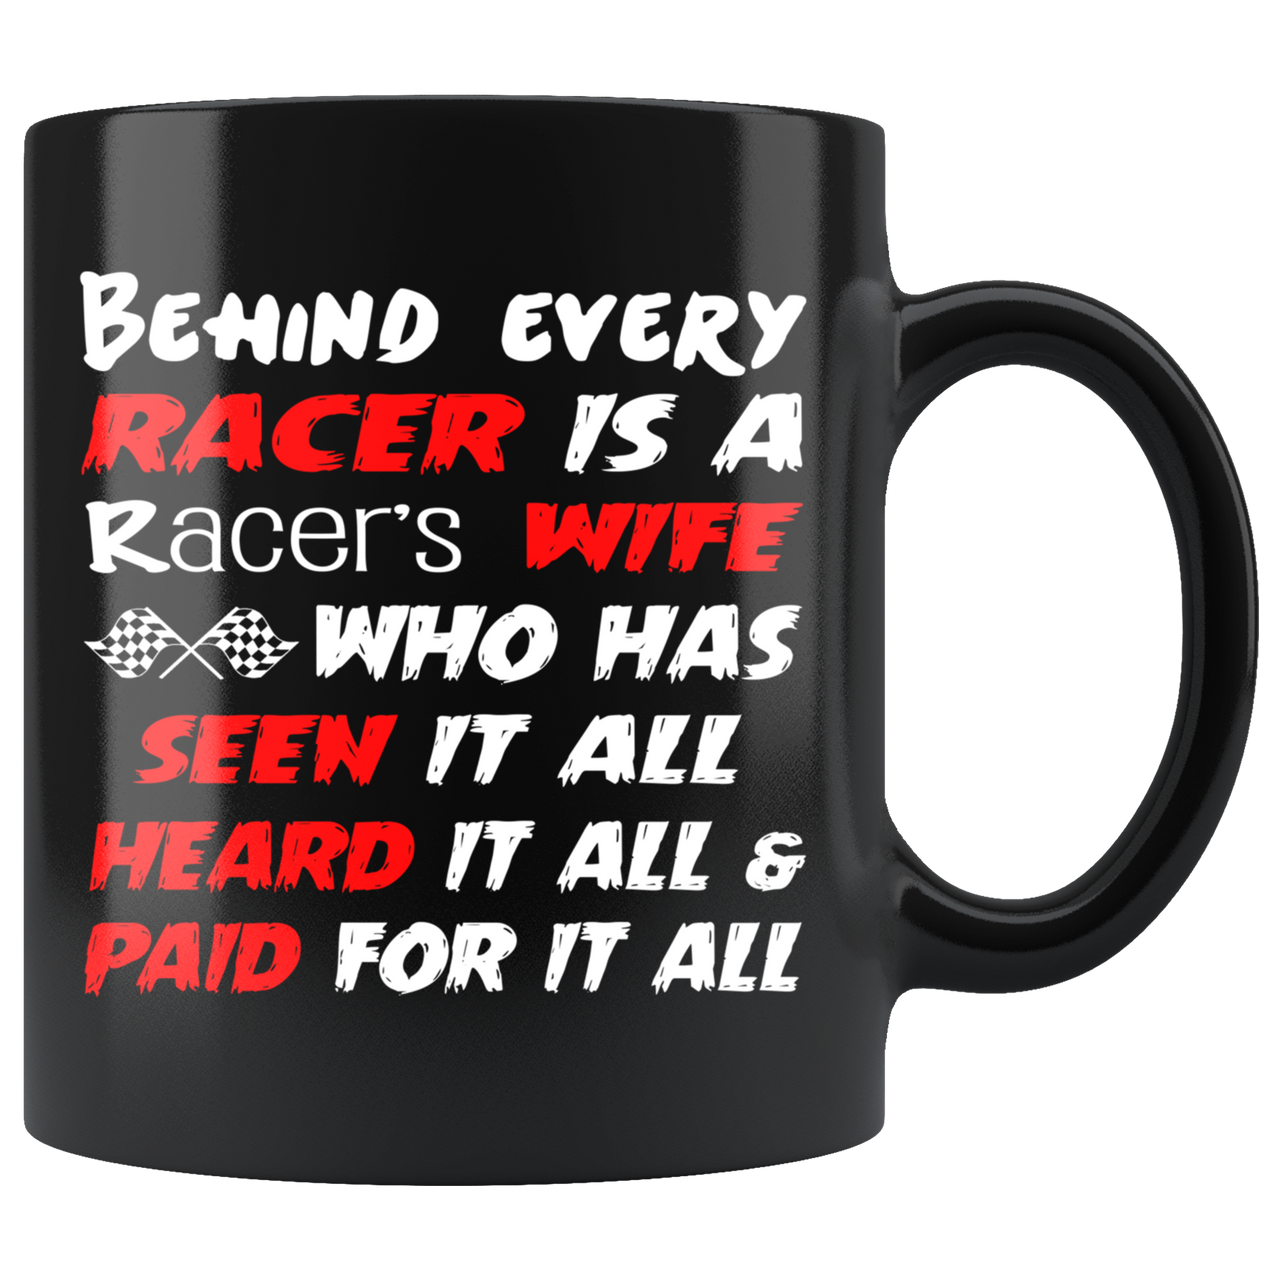 Behind Every Racer Is A Racer's Wife Mug!